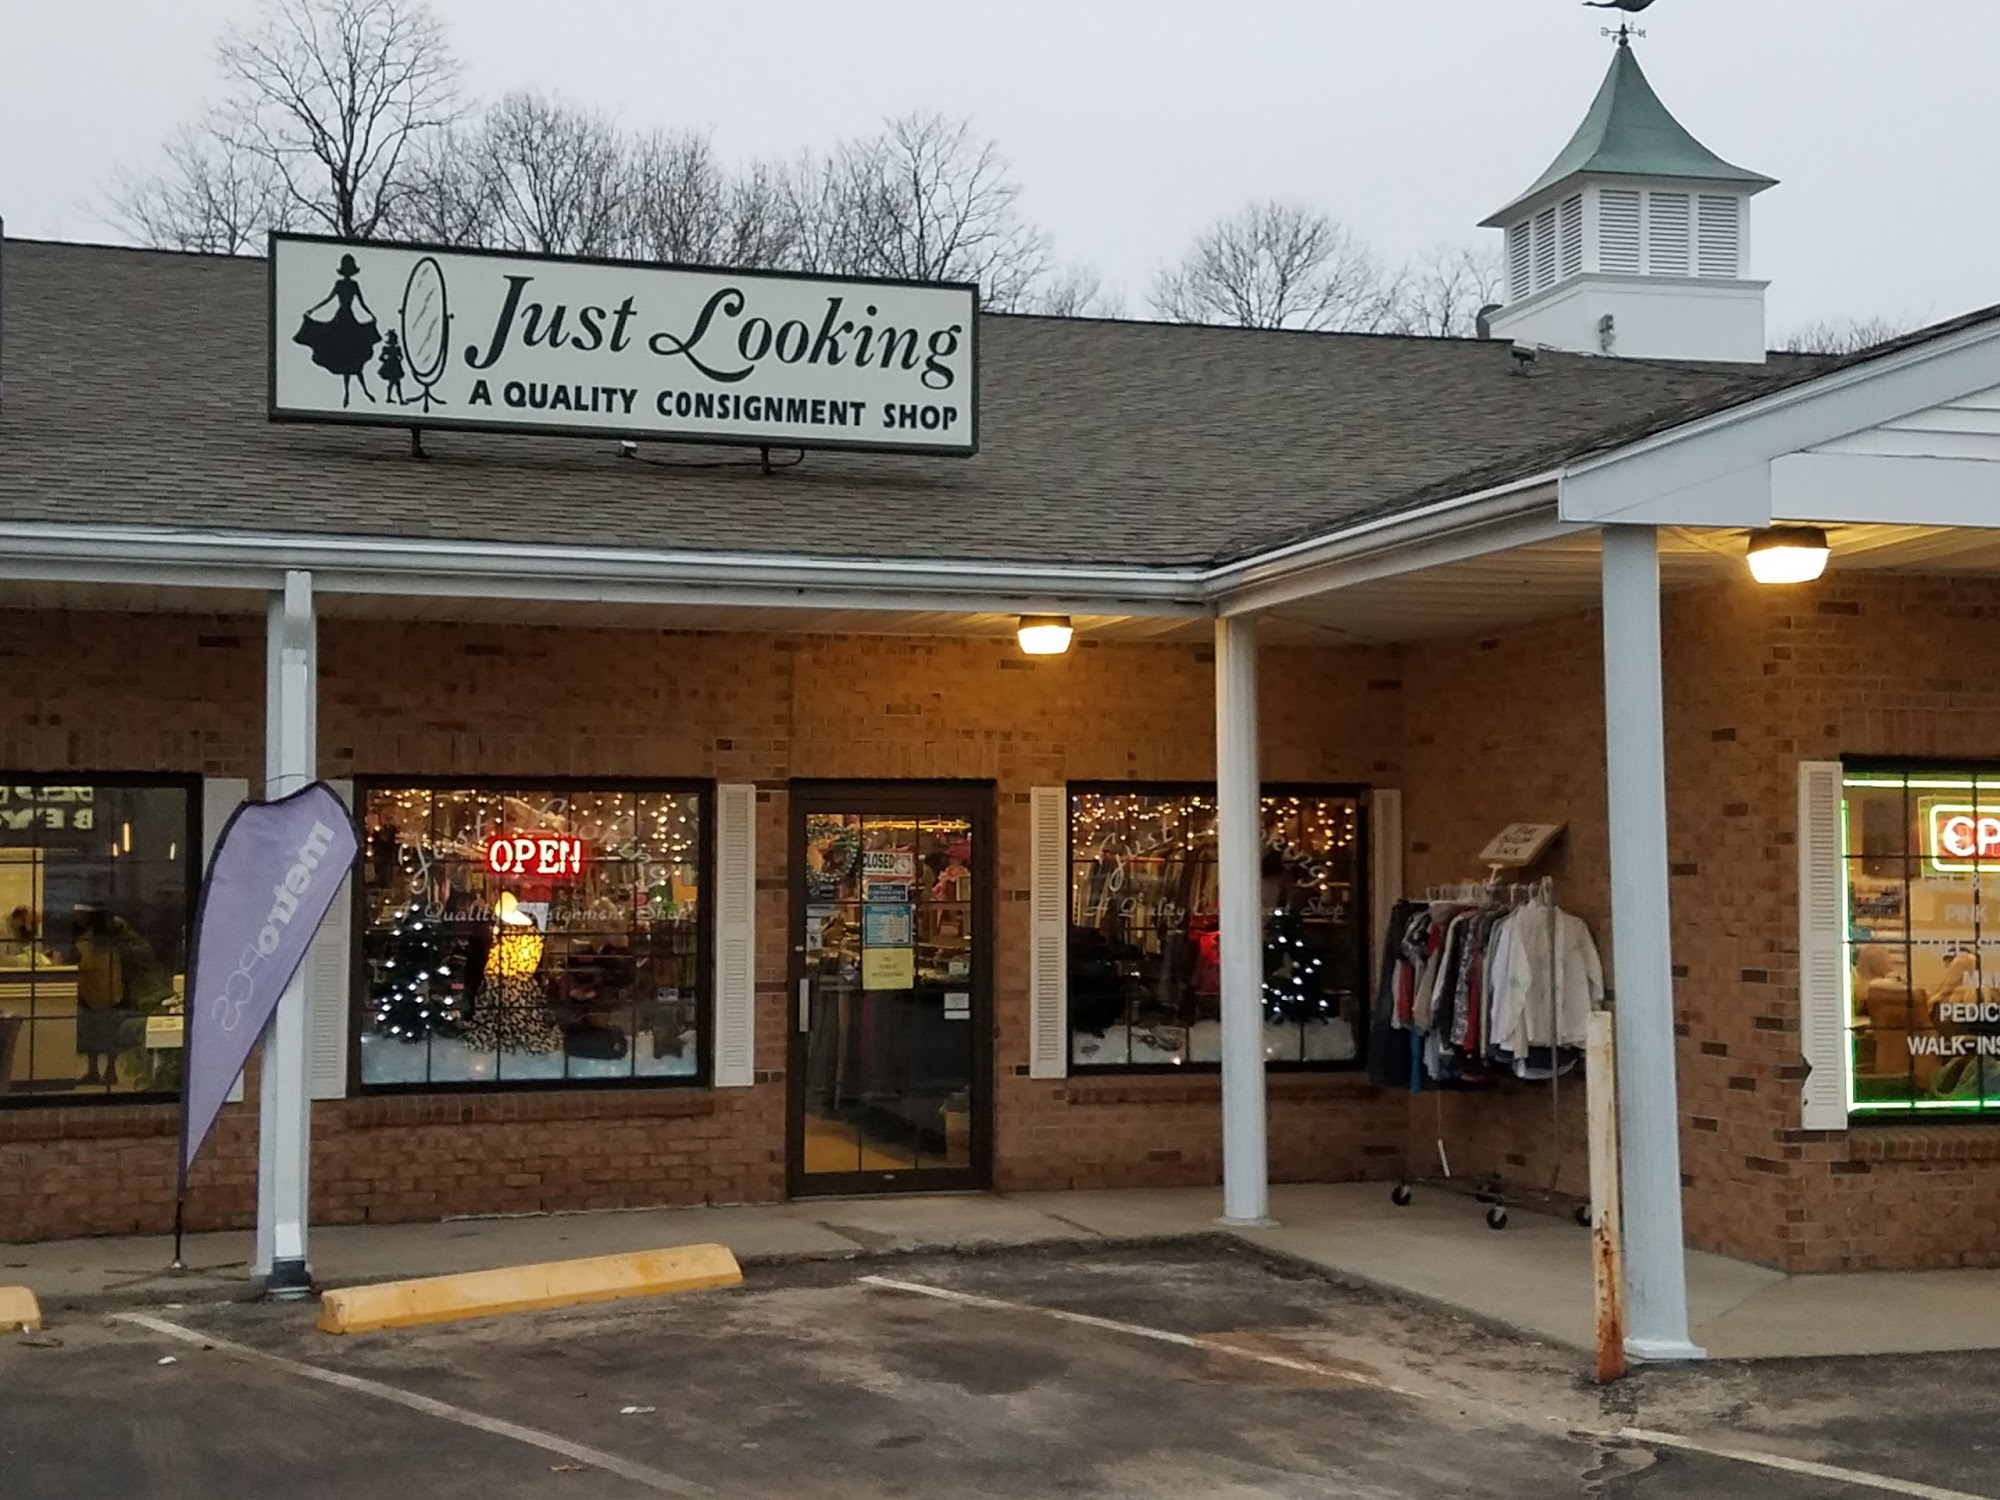 Just Looking Consignment Shop